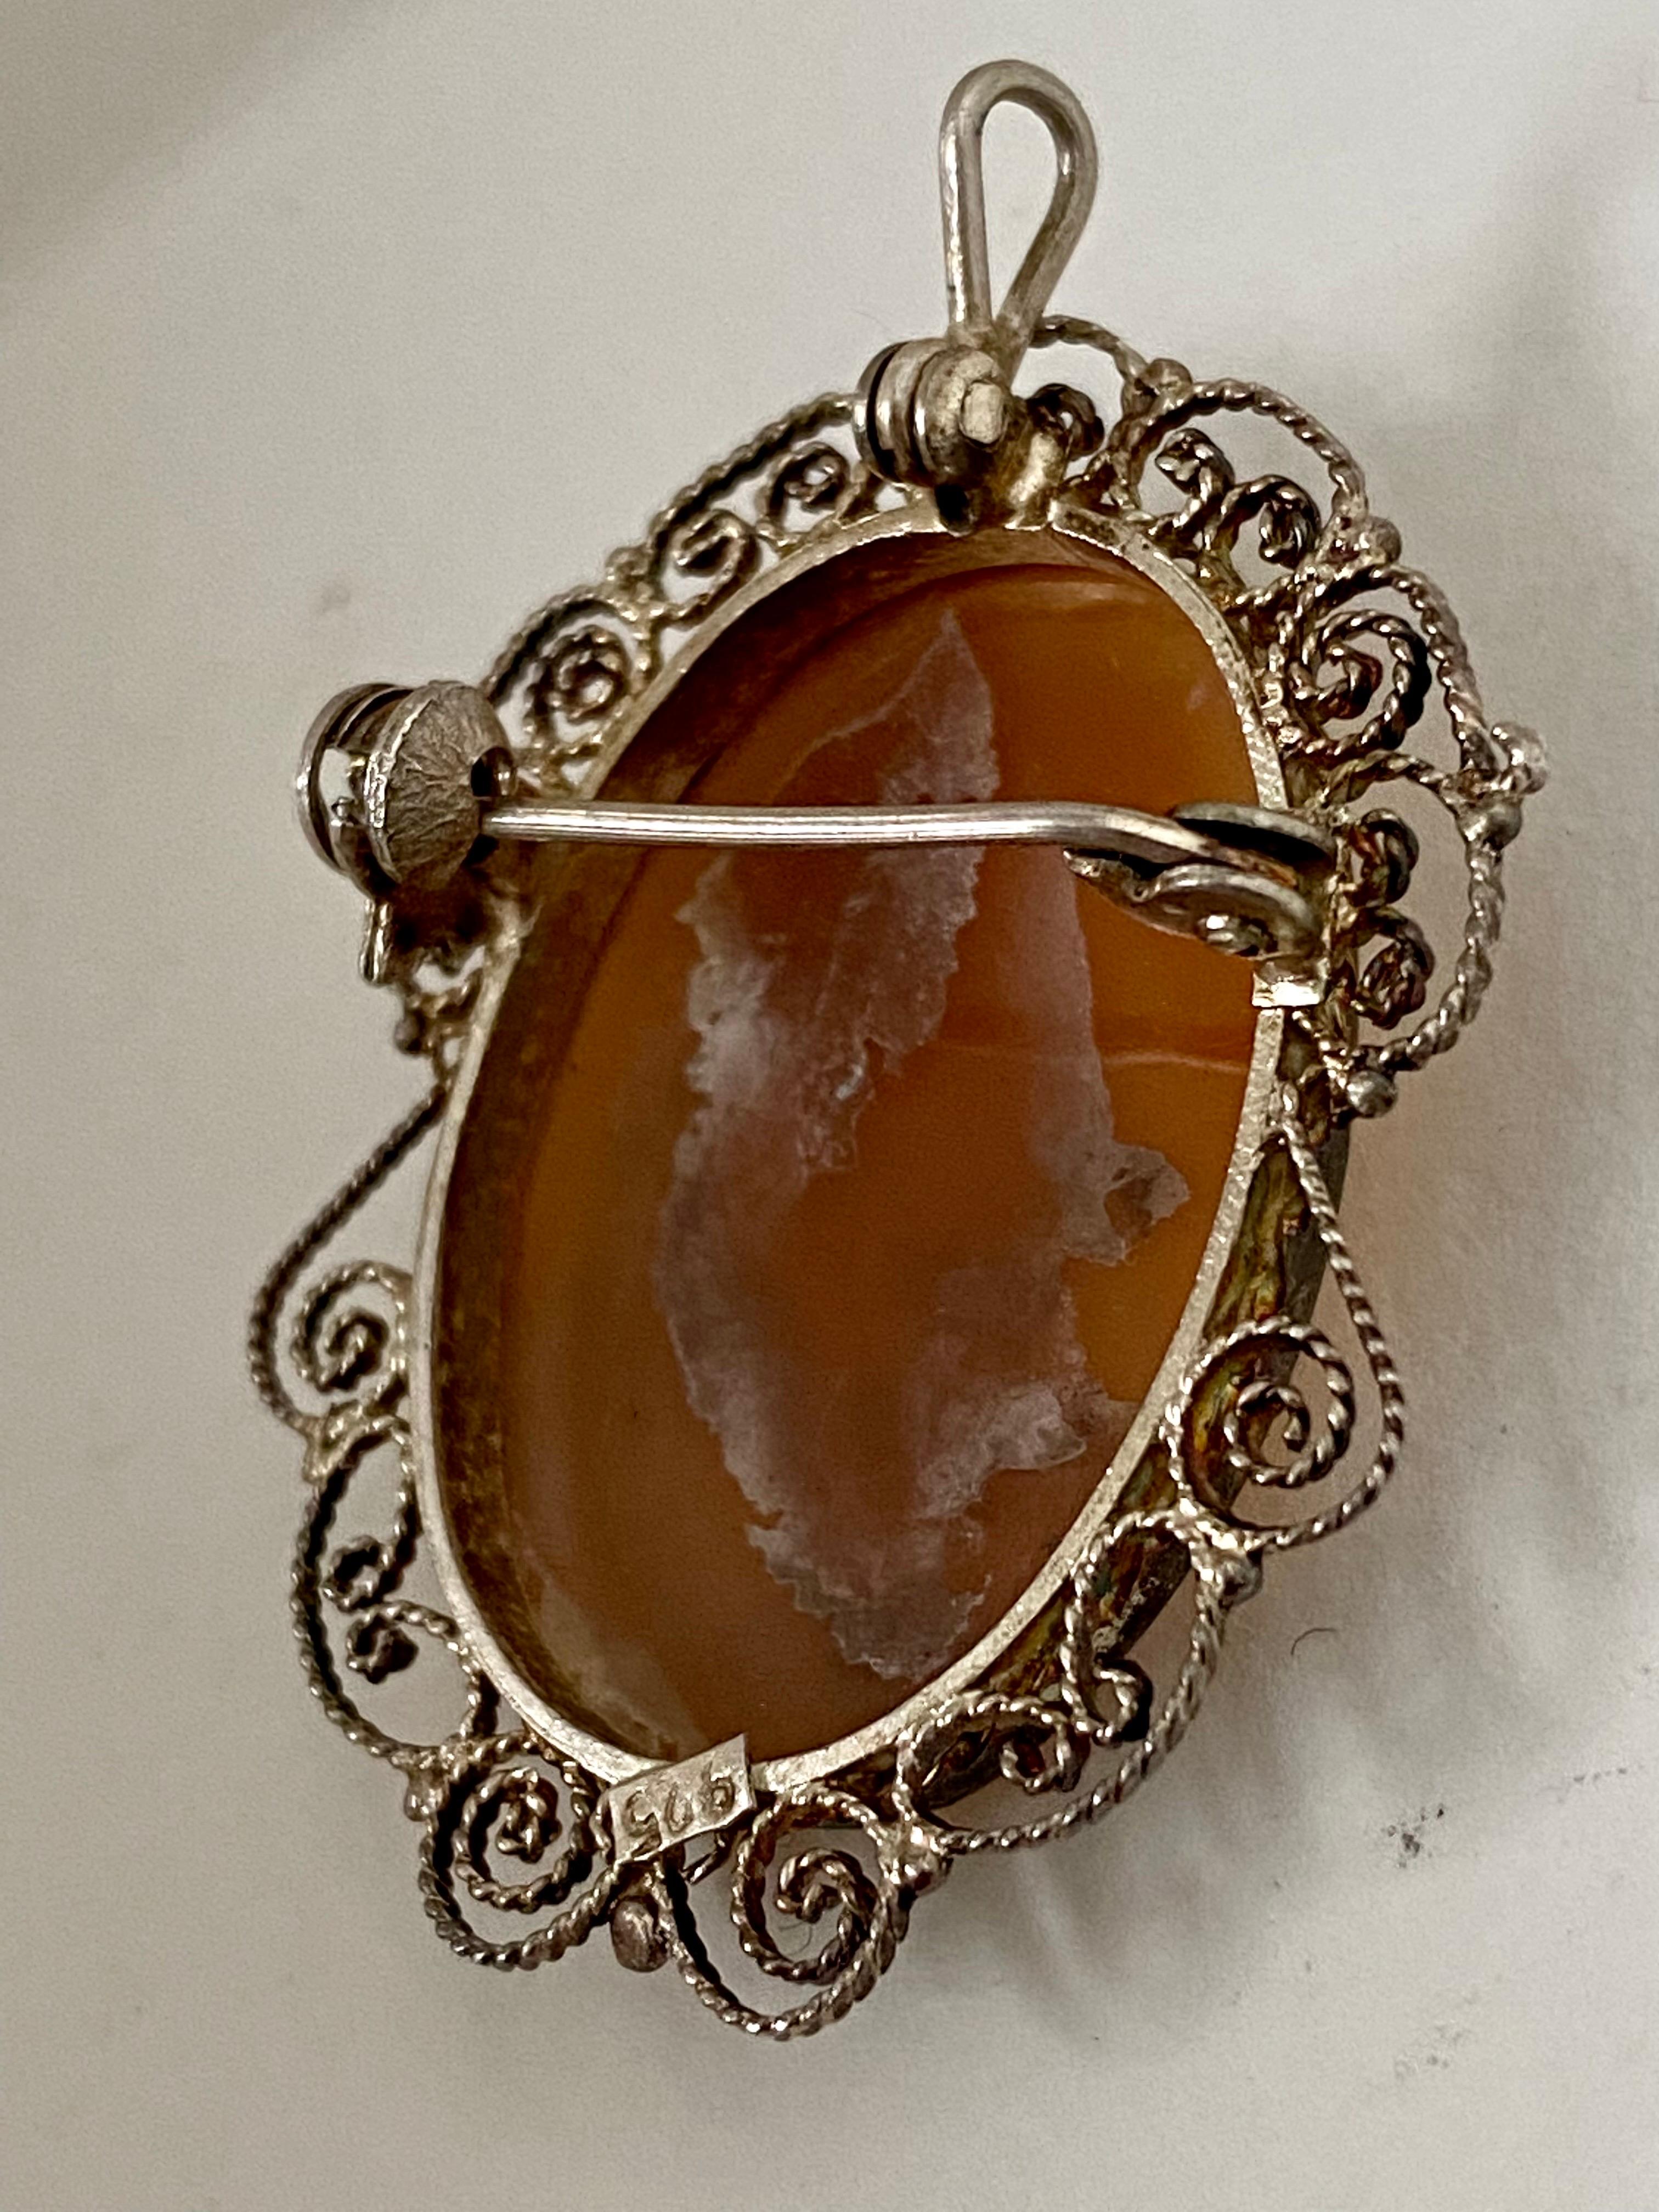 This beautiful piece is in good condition for its age. Visible signs of ageing and wear. It can be wear as a brooch or as pendant necklace. It does not come with a chain. It is 34mm long by 28mm wide. Please study the images carefully as form part